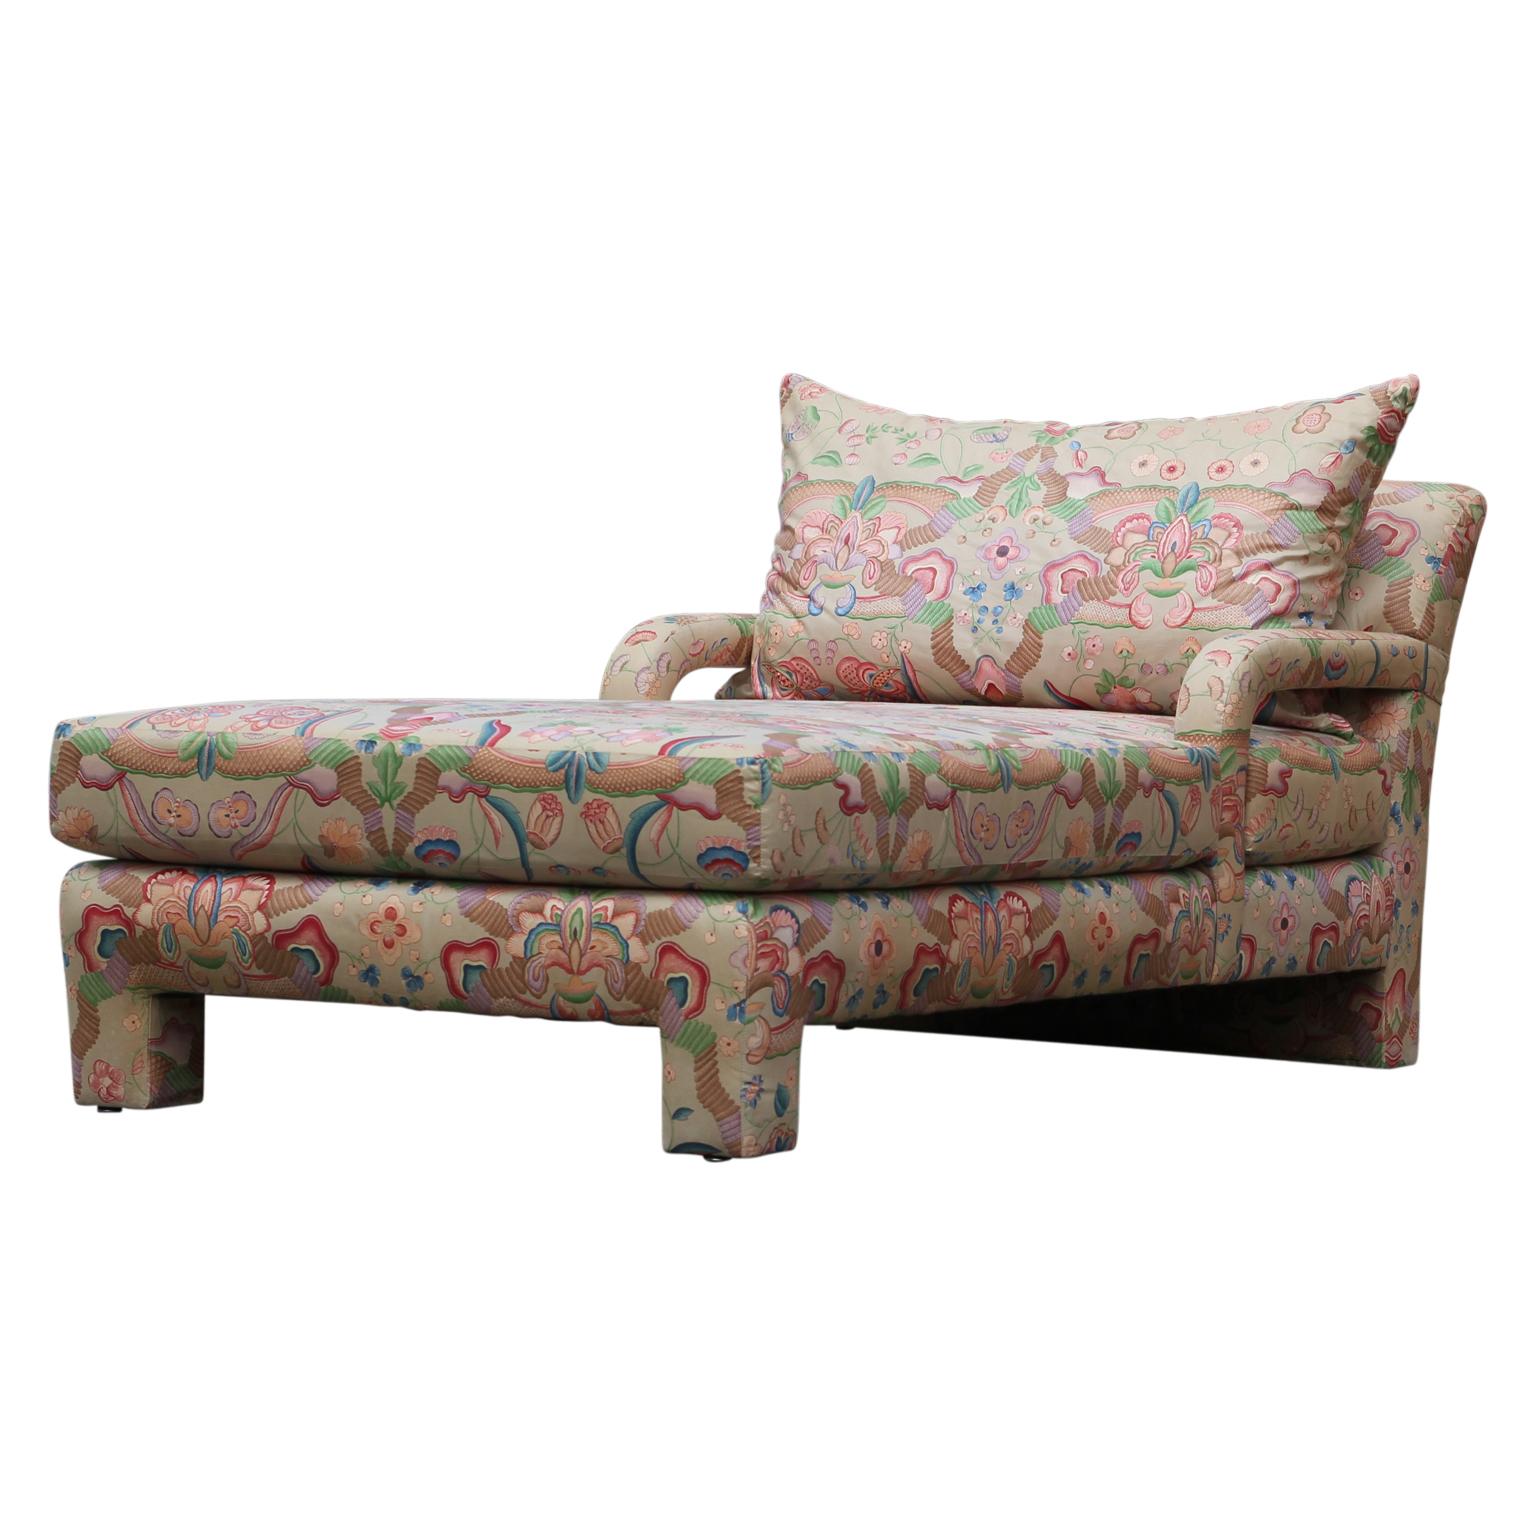 Unique chaise lounge with a large detachable pillow. The lounger is upholstered in a colorful floral fabric. Under the cushion is a John Macheroni and Swaim originals tag. Original fabric is in excellent condition.